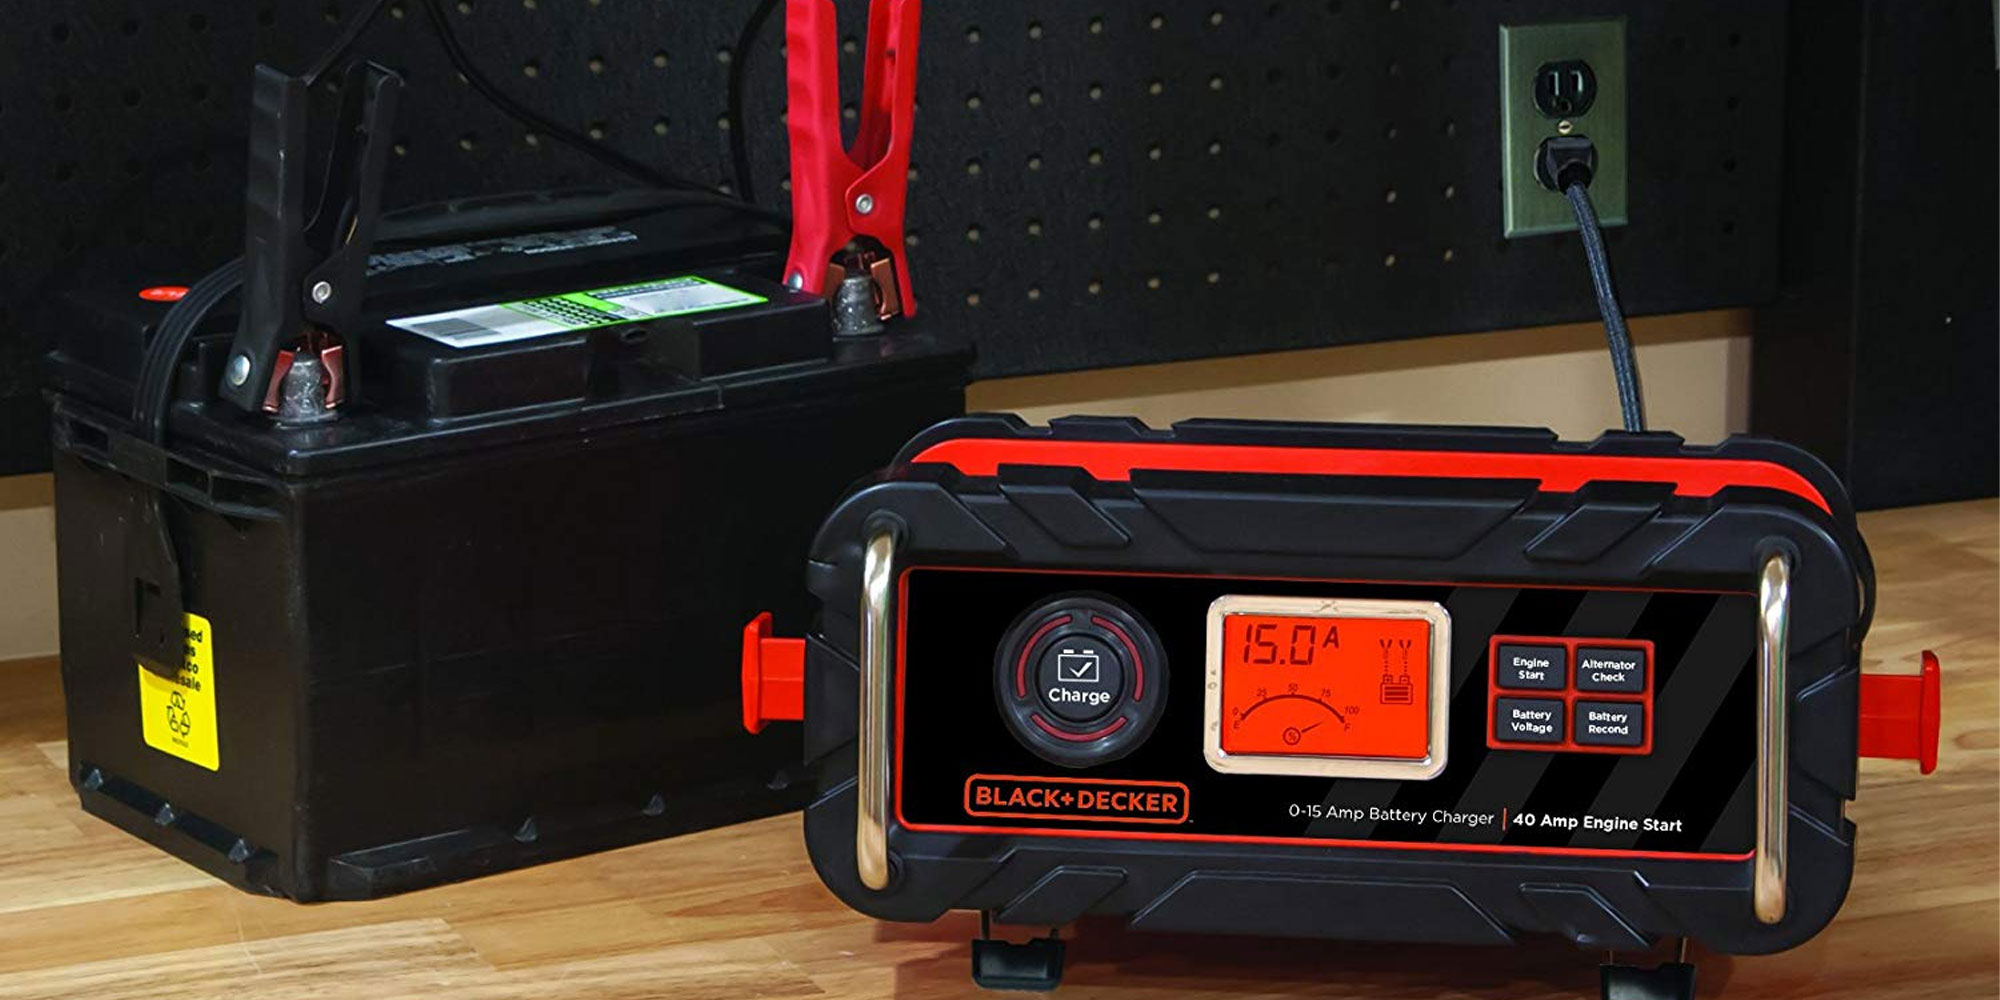 https://9to5toys.com/wp-content/uploads/sites/5/2019/07/BLACK-and-DECKER-Fully-Automatic-15A-12V-Battery-Charger-Maintainer.jpg